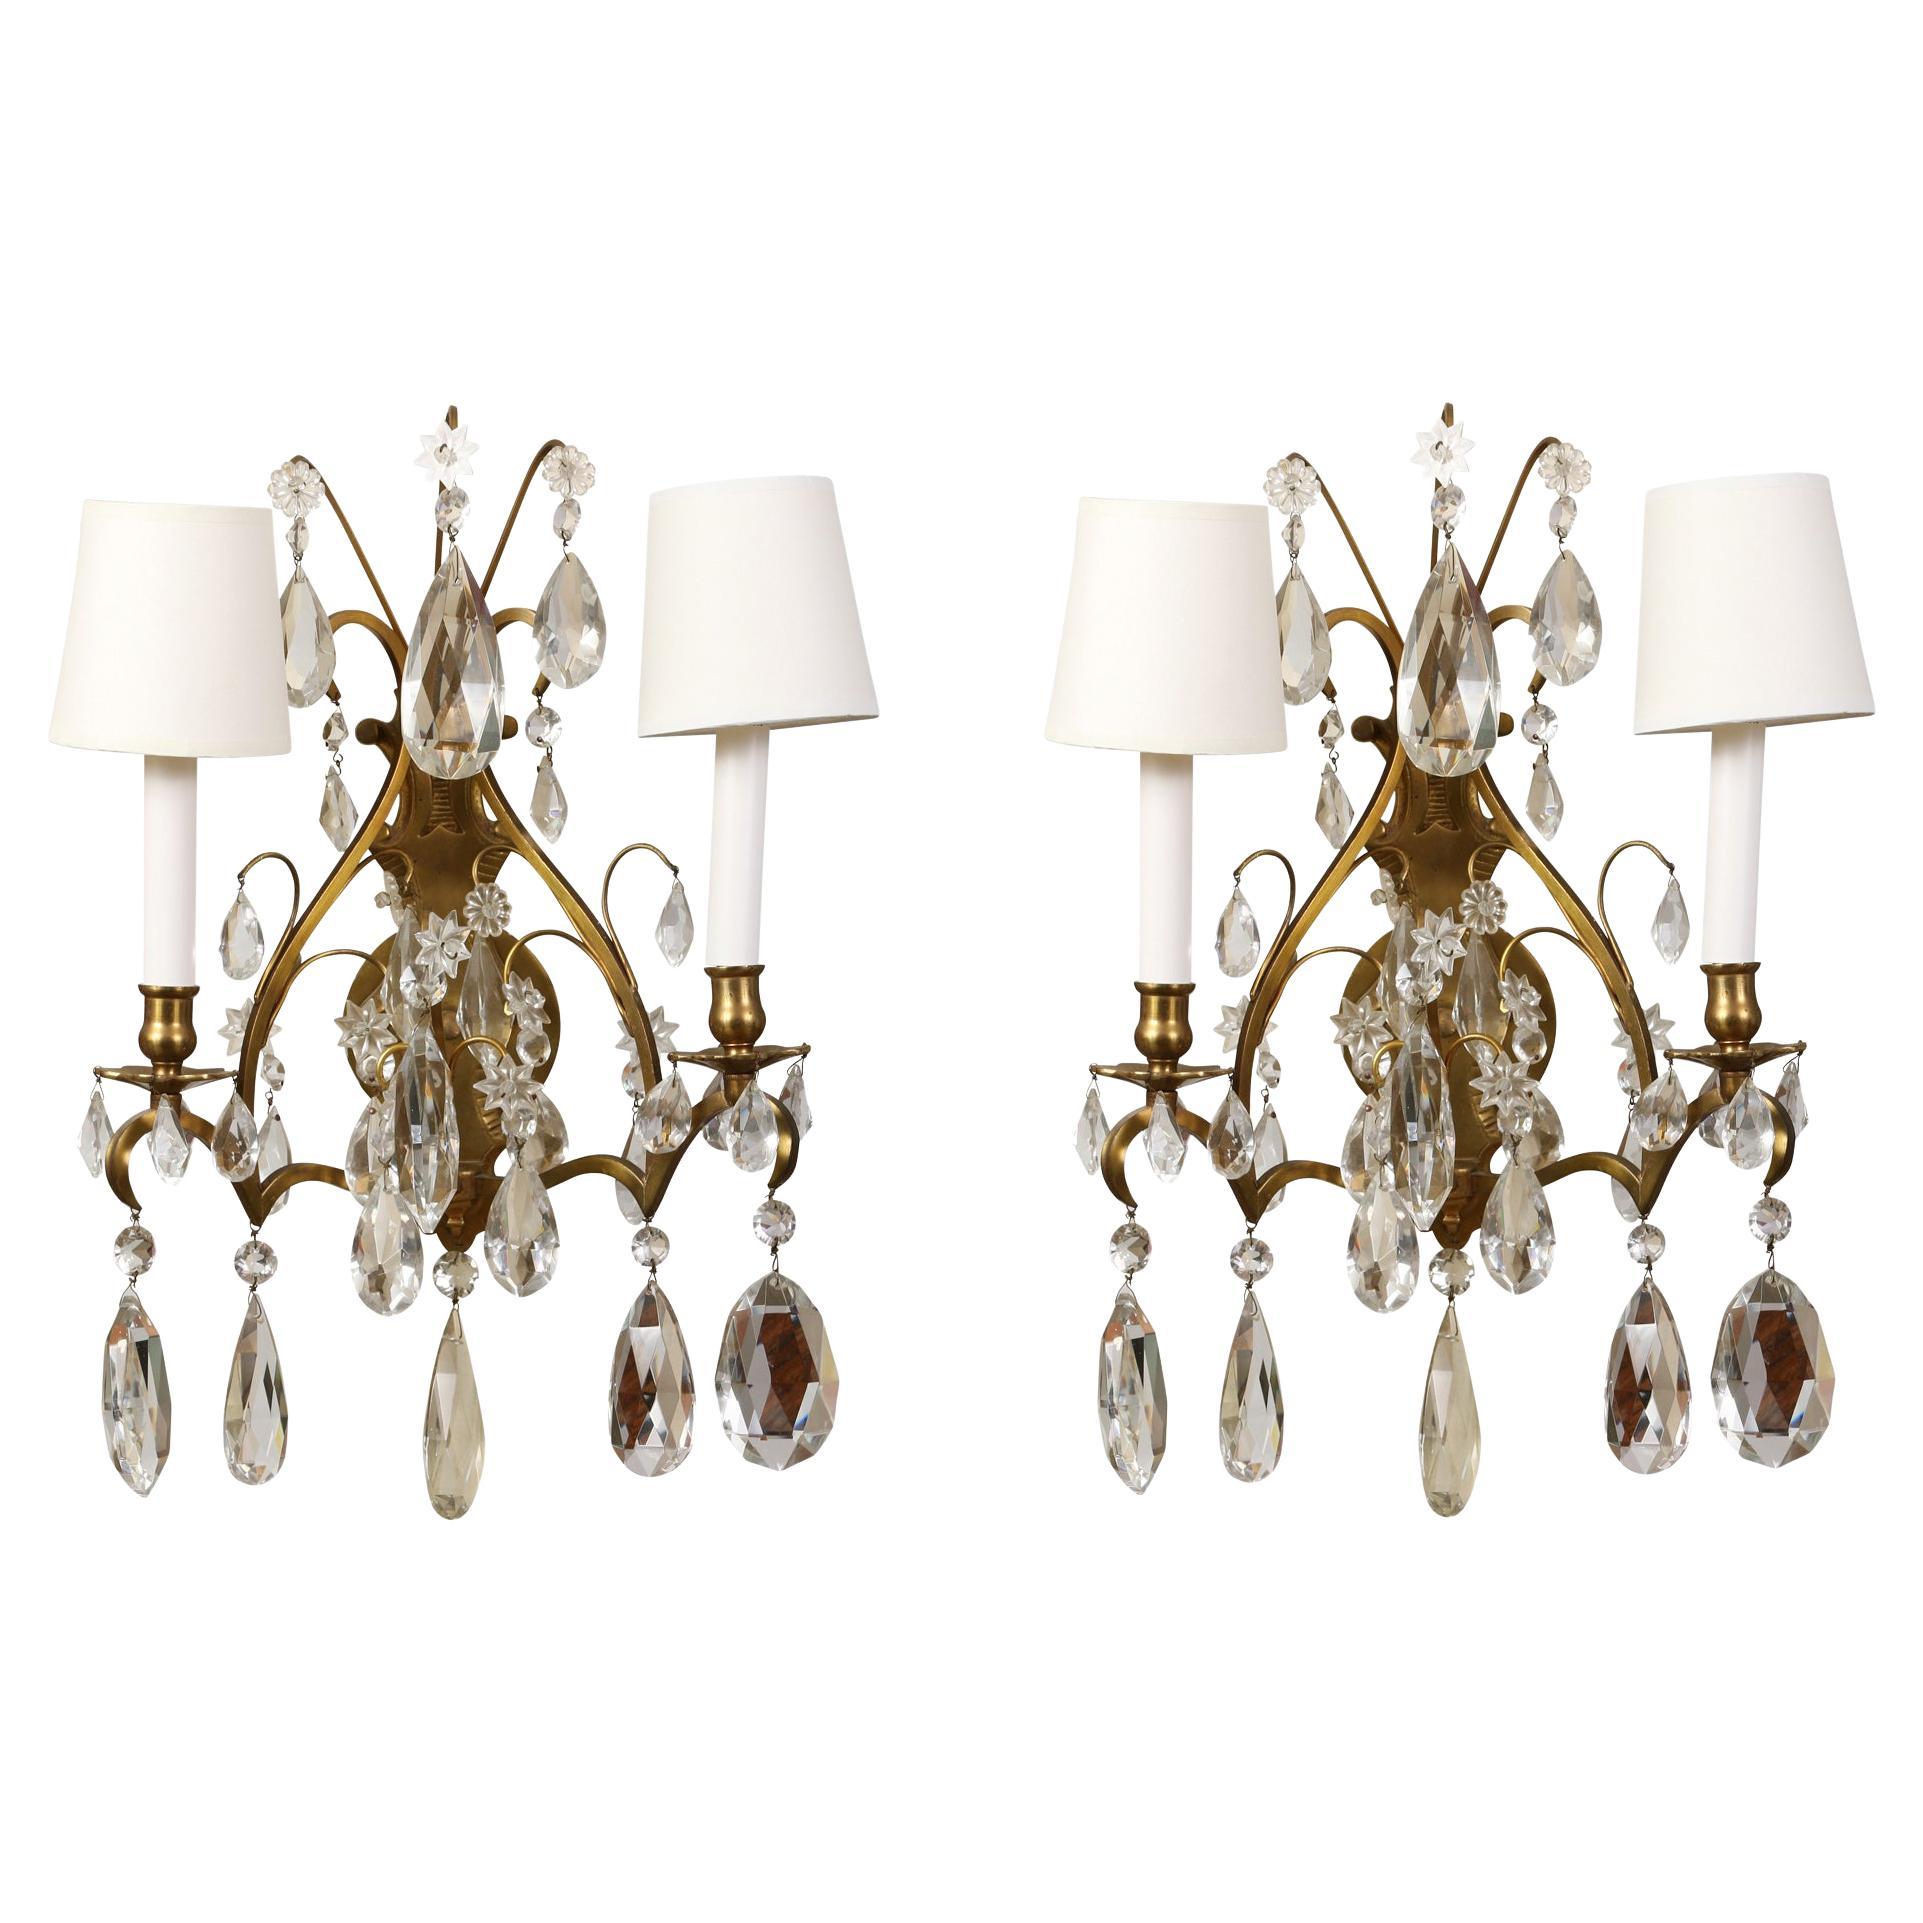 Pair of Vintage Double Arm Sconces With Hanging Crystals